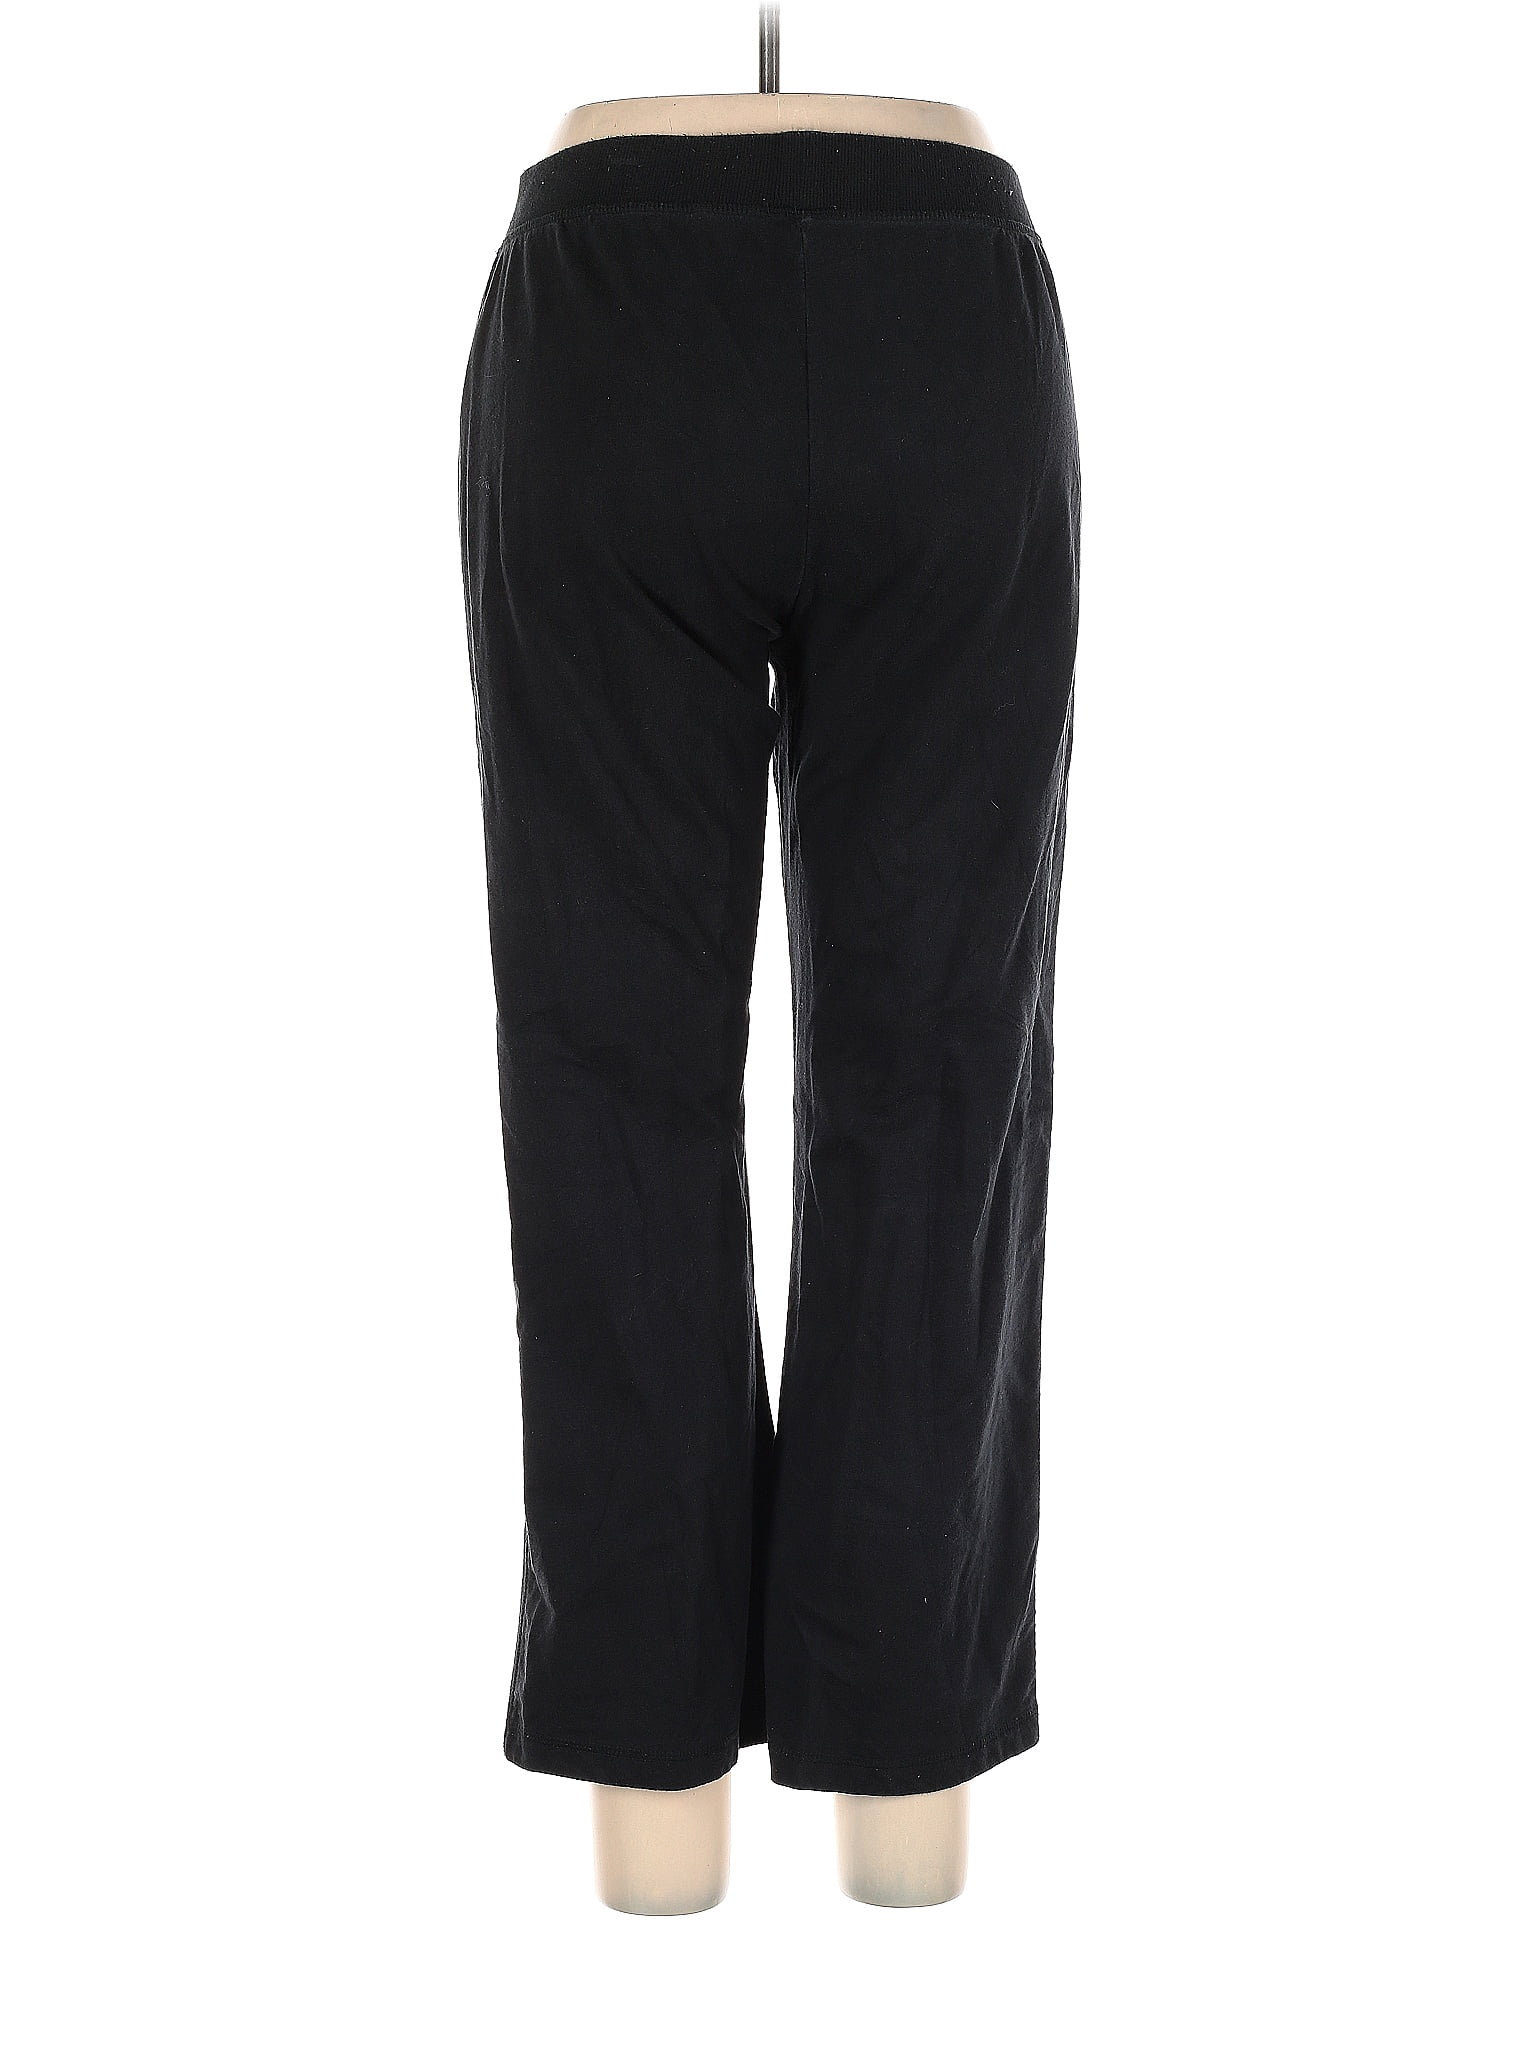 Lululemon Size 6 high wasted full length joggers - $35 - From Abby